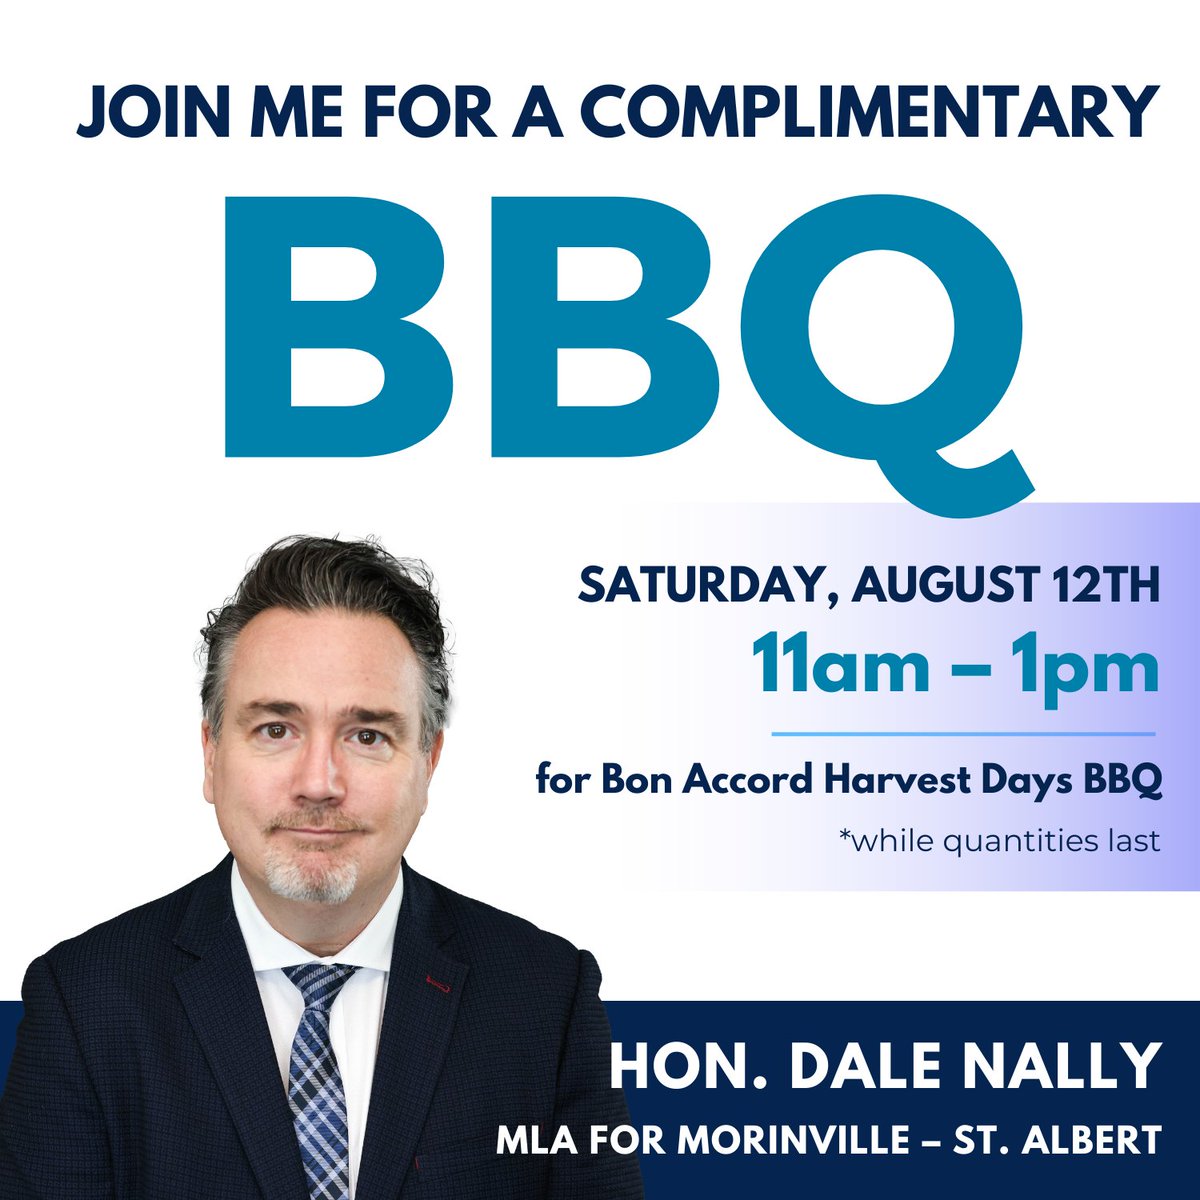 Mark your calendar!  Join me next Saturday,  August 12,    for a Complimentary BBQ at the Bon Accord Harvest Days BBQ.  See you there. #bonaccordharvestdaysbbq #bonaccord